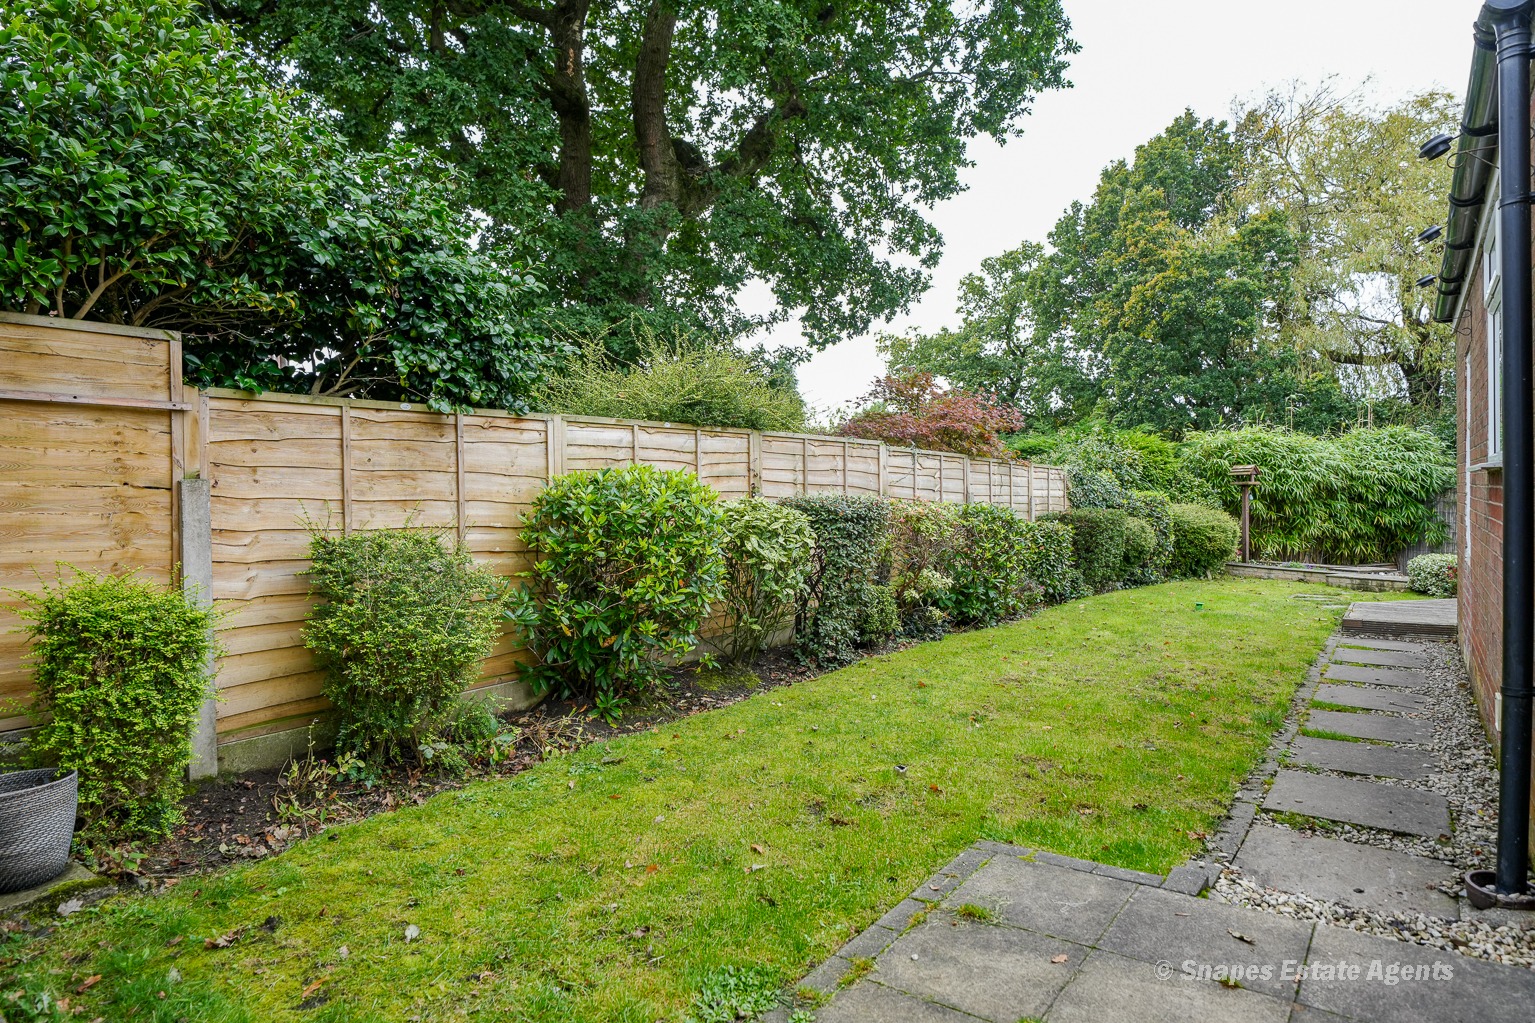 Images for Dairyground Road, Bramhall SK7 2LY